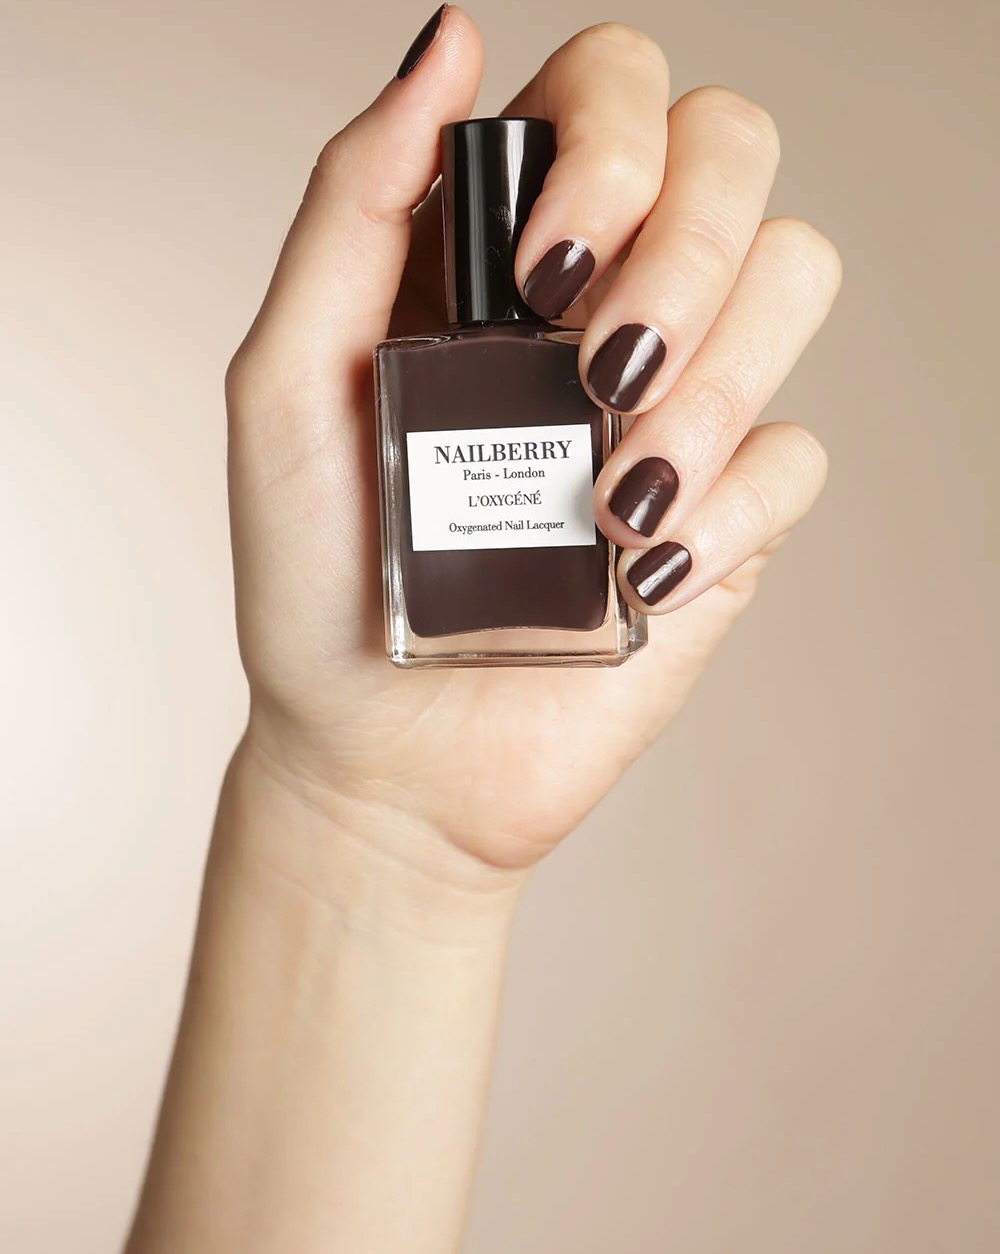 The Best Fall Nail Polish Colors: Reds, Golds, and Blacks - Meg O. on the Go